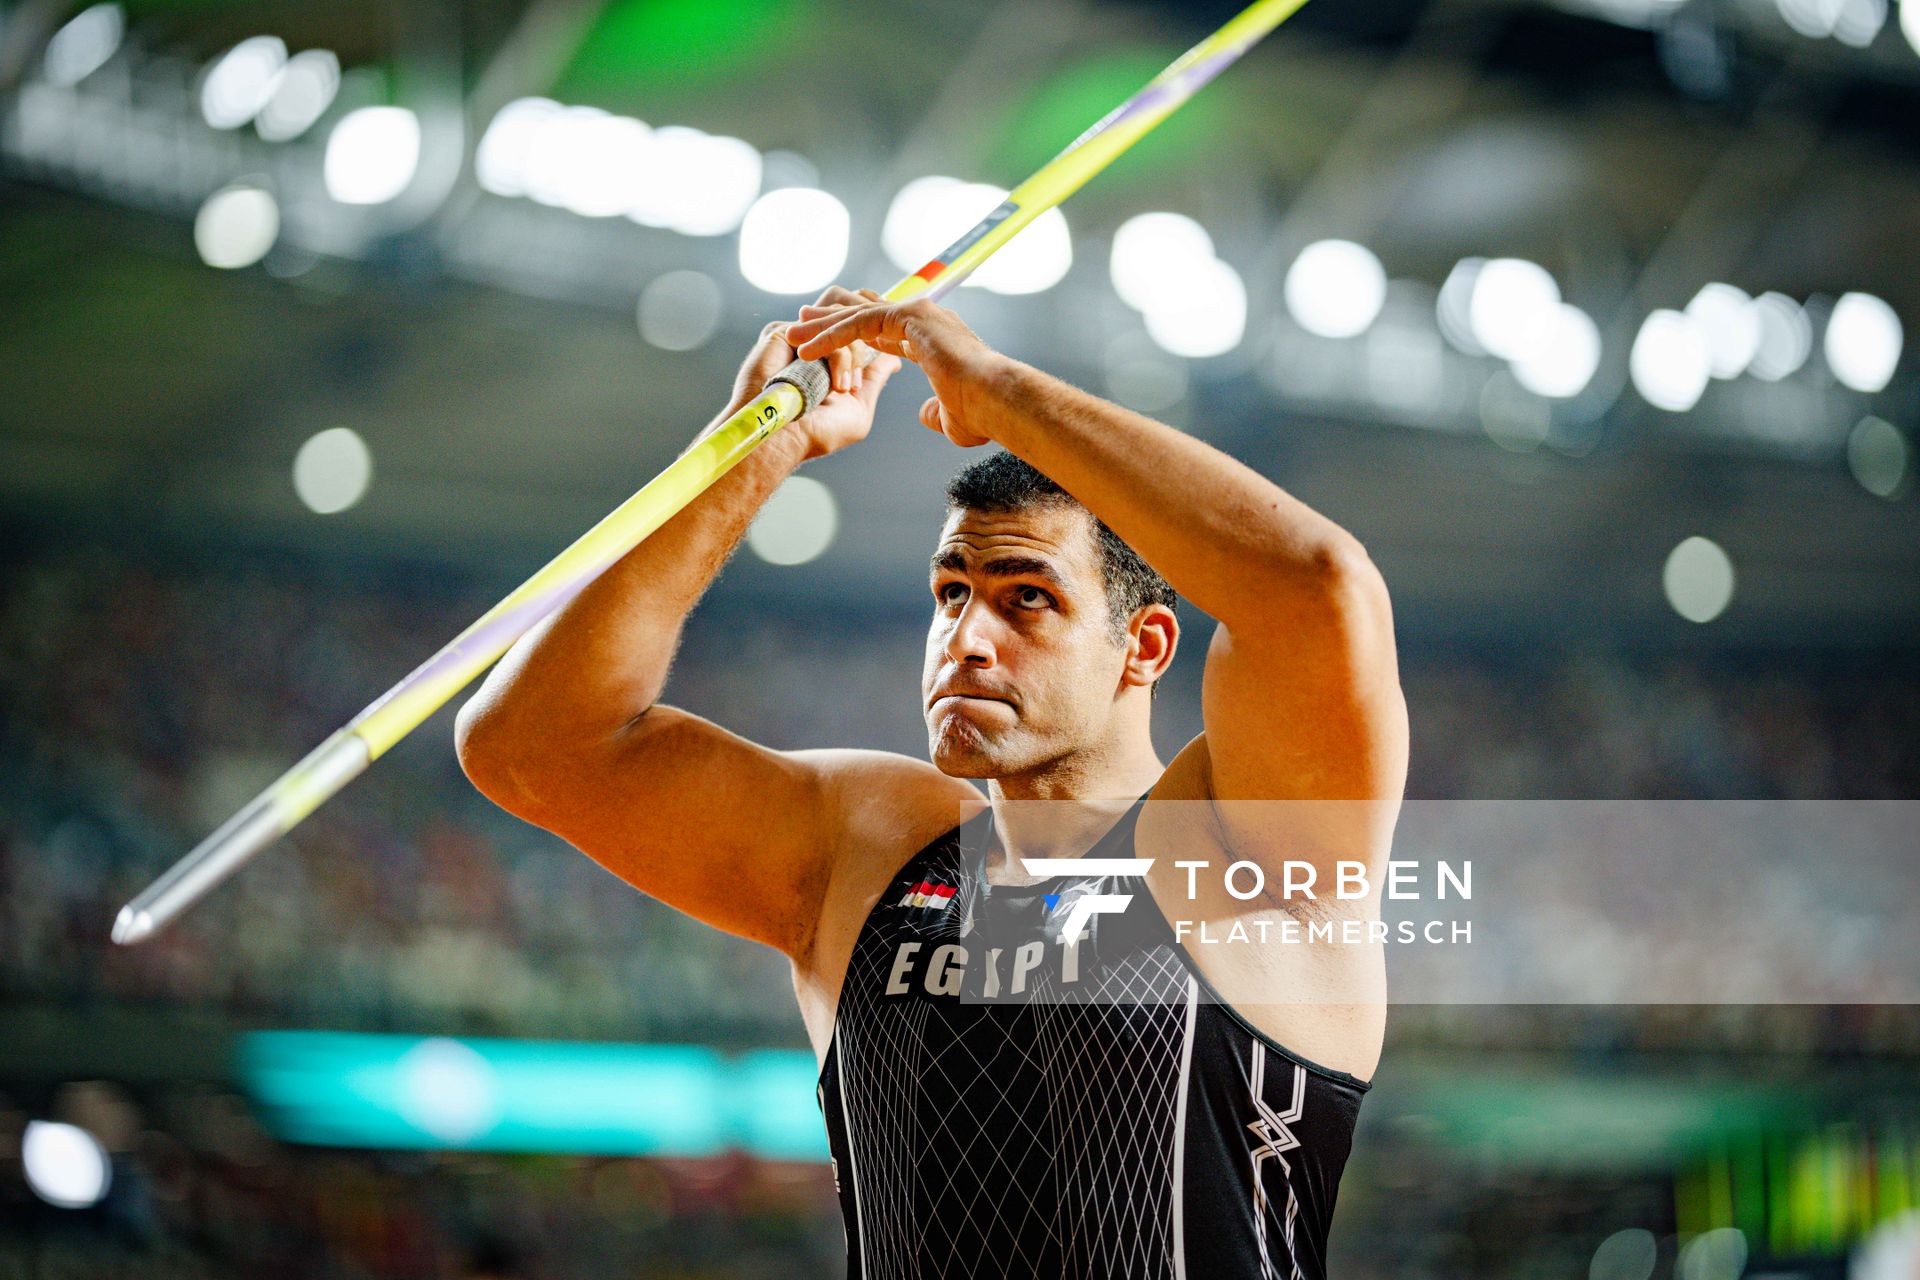 Ihab Abdelrahman (EGY/Egypt) during the Javelin Throw Final on Day 9 of the World Athletics Championships Budapest 23 at the National Athletics Centre in Budapest, Hungary on August 27, 2023.